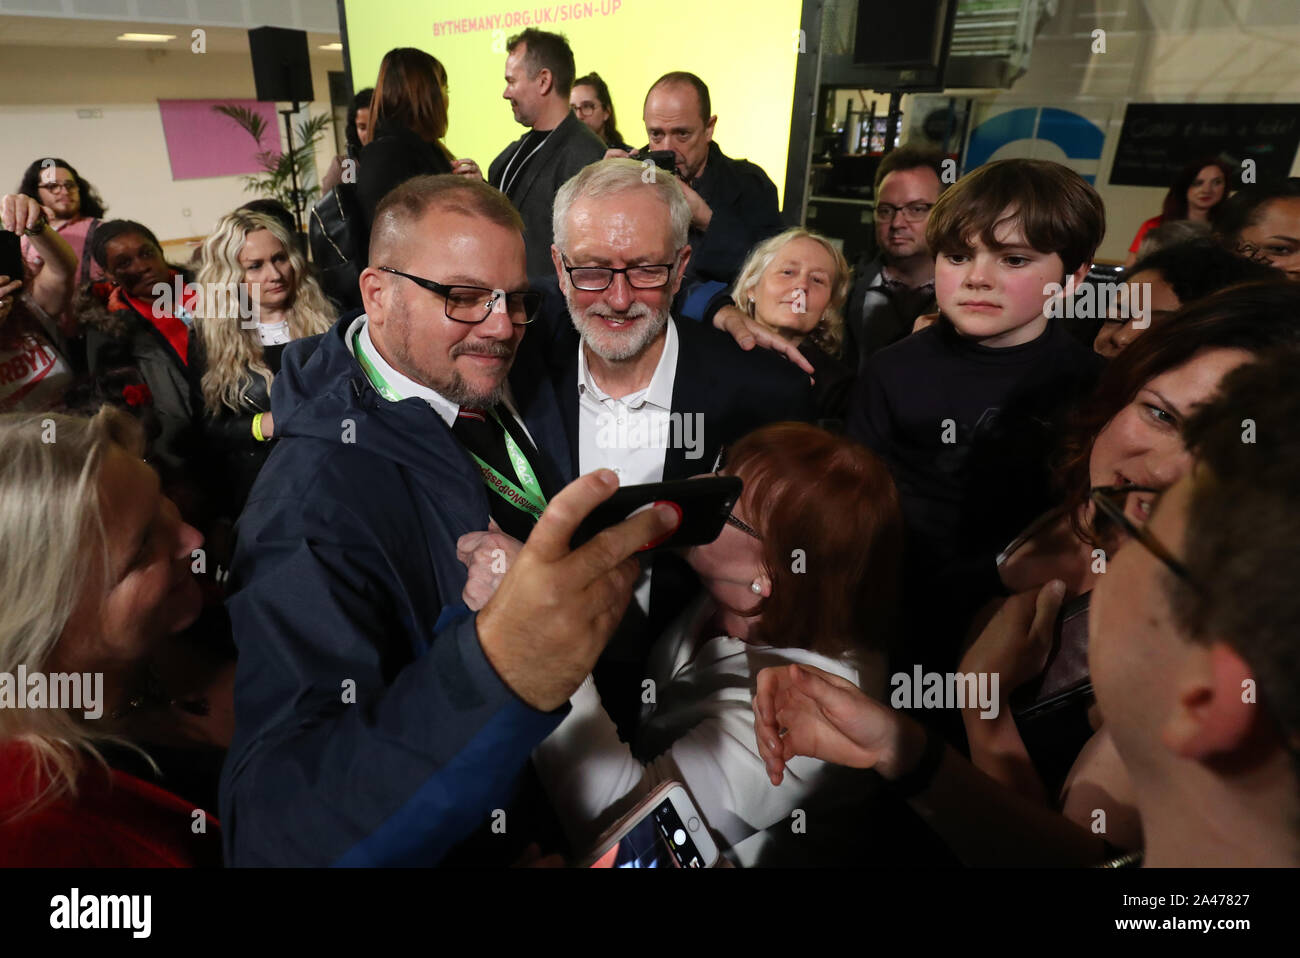 Labour leader Jeremy Corbyn poses for a selfie following his speech at a rally in Hastings, East Sussex, where he promised to fix the 'grotesque inequality' blighting 'held-back' coastal communities in an election pitch in the key marginal seat. Stock Photo